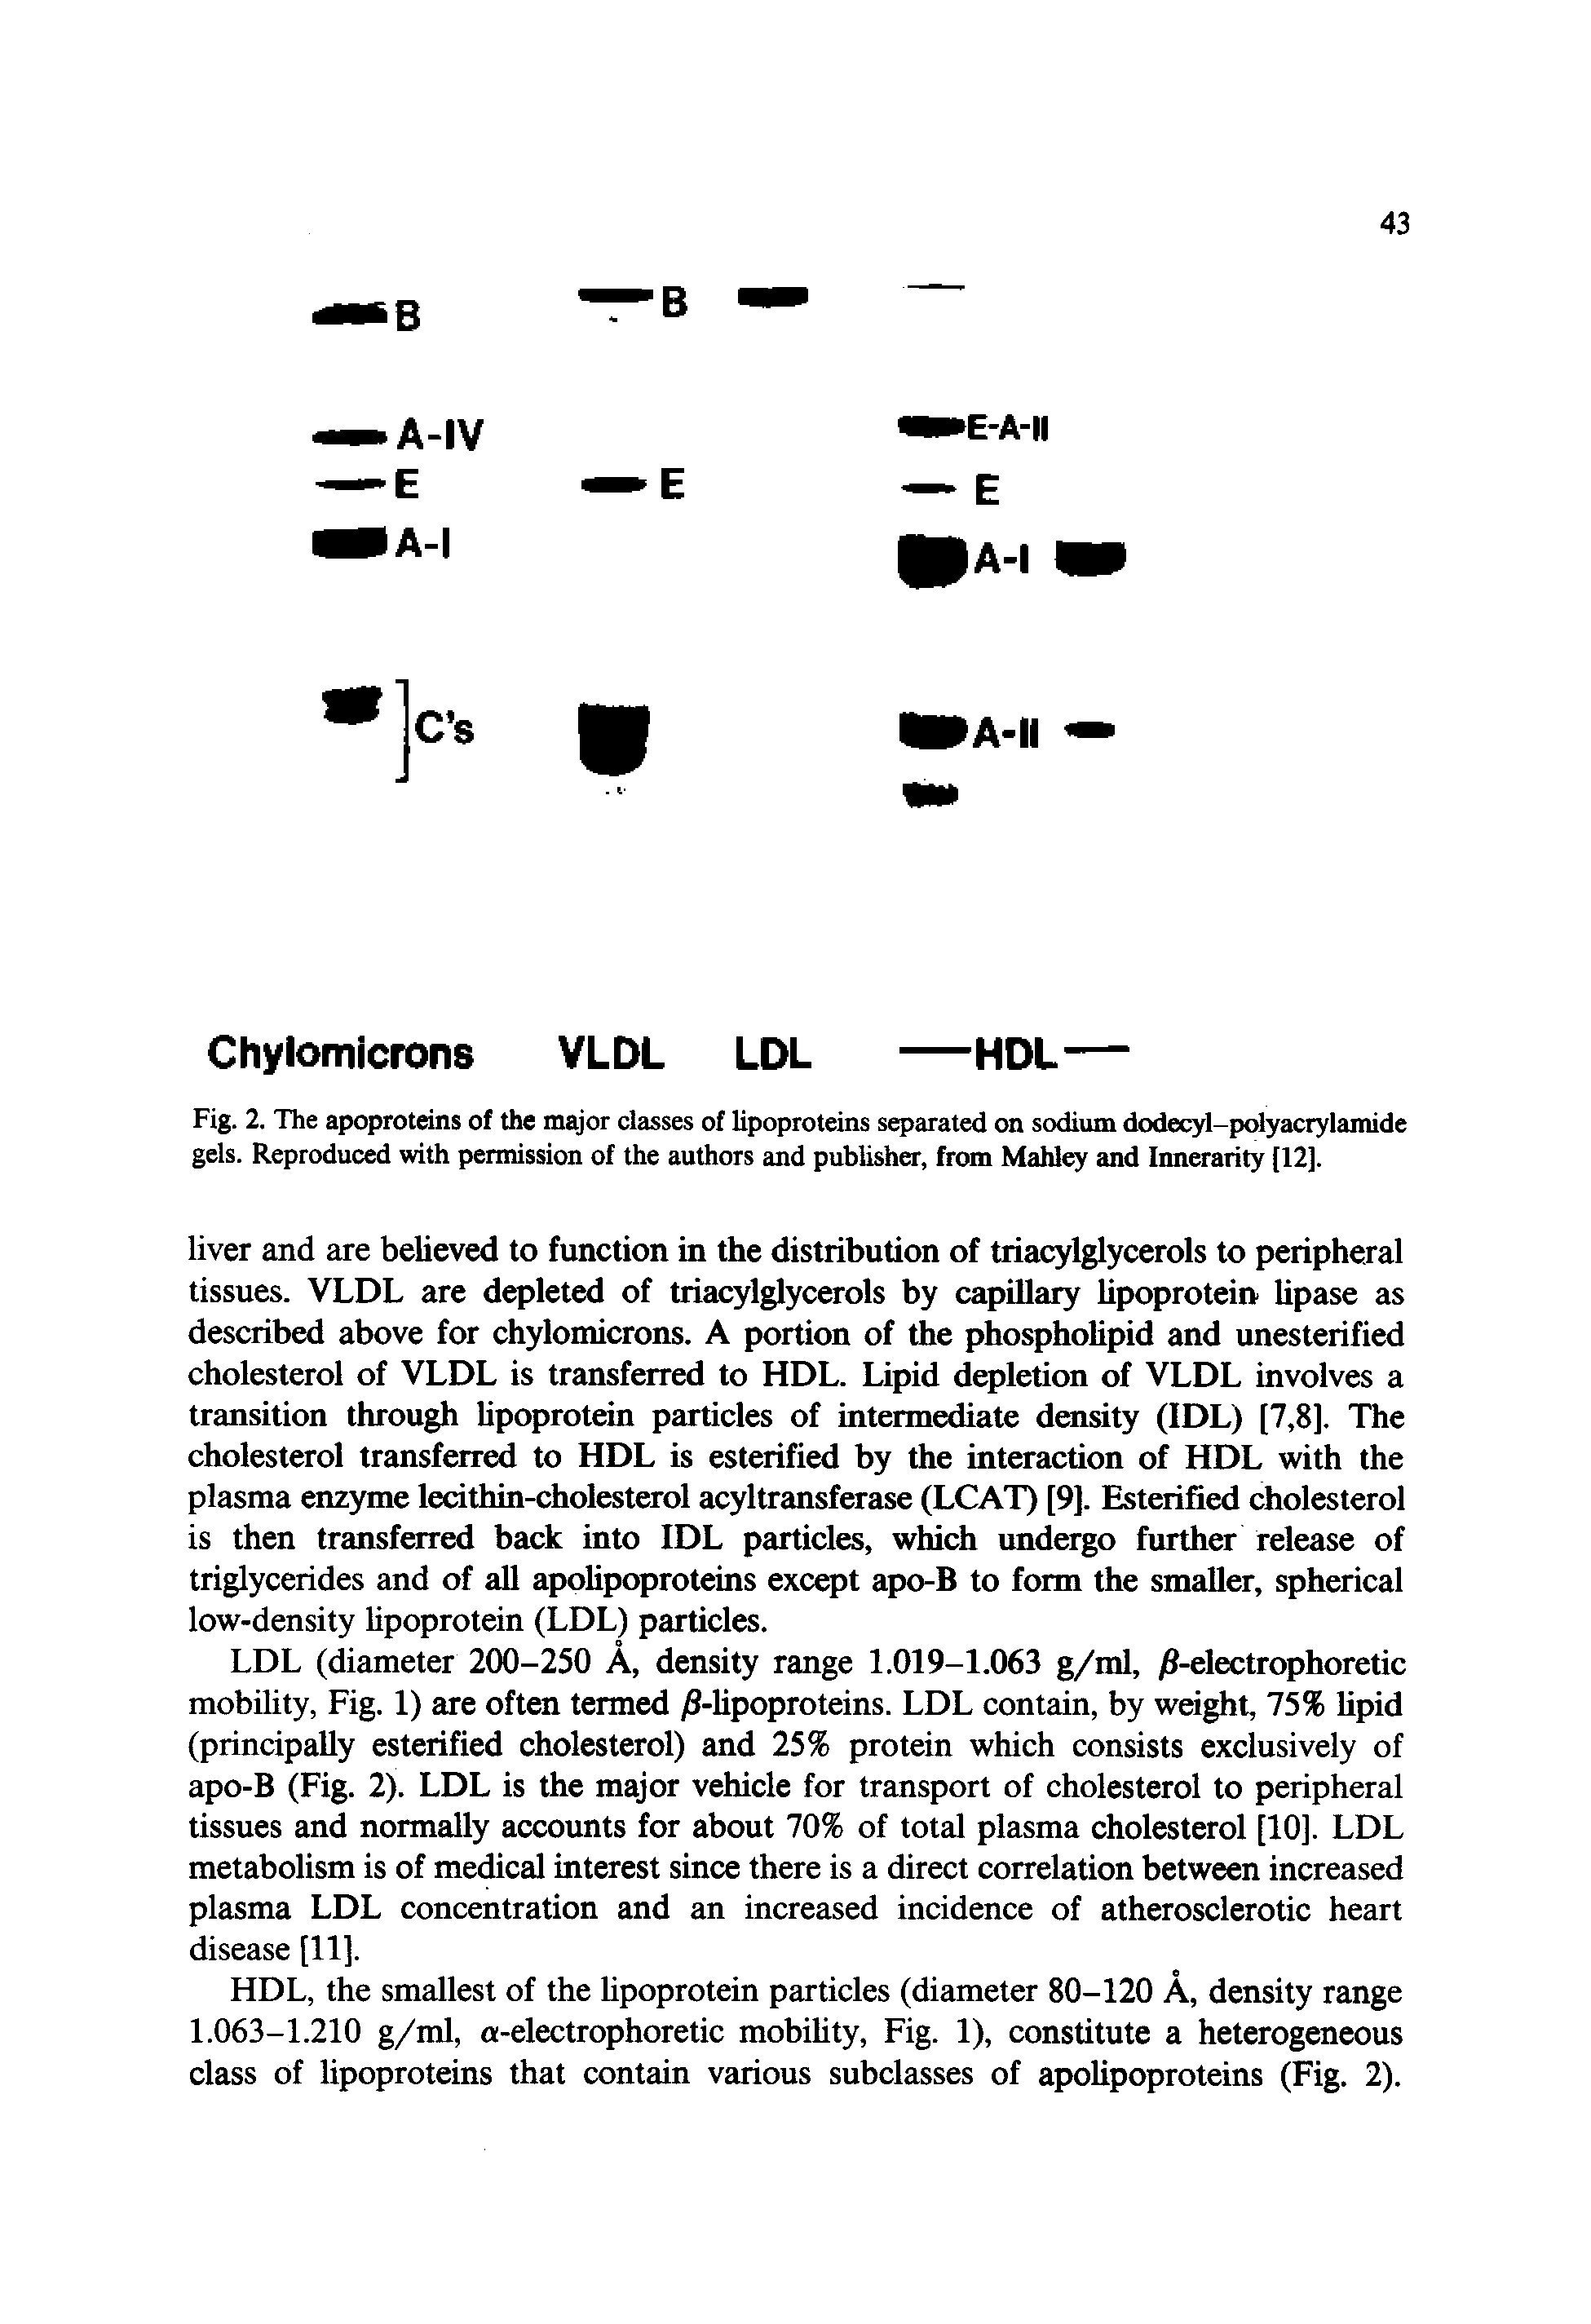 Fig. 2. The apoproteins of the major classes of lipoproteins separated on sodium dodecyl-polyacrylamide gels. Reproduced with permission of the authors and publisher, from Mahley and Innerarity [12].